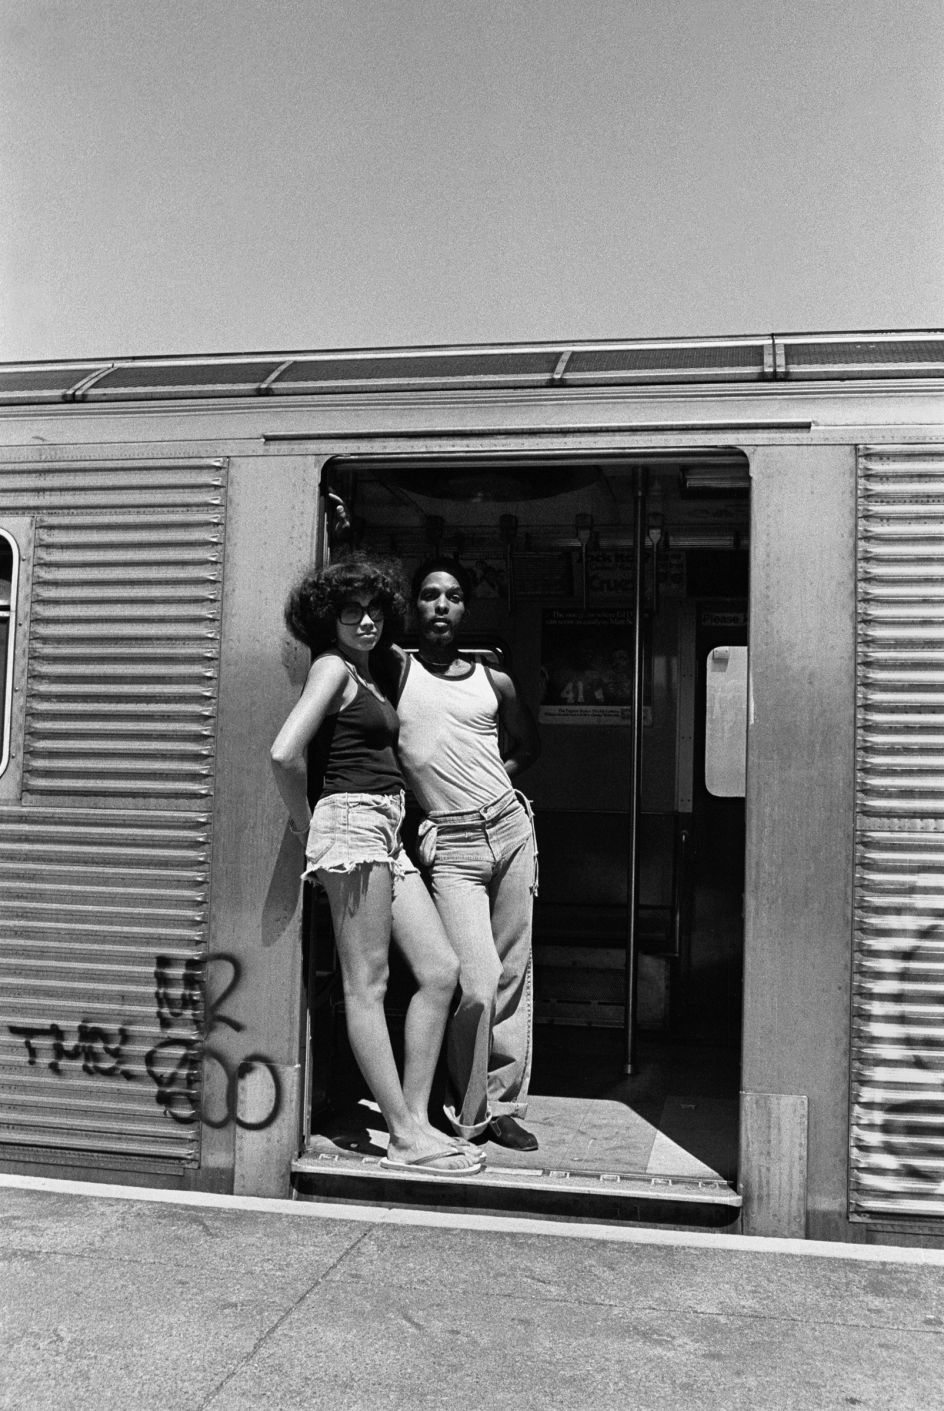 Couple Subway Door, year unknown © Estate of Harold Feinstein All rights reserved